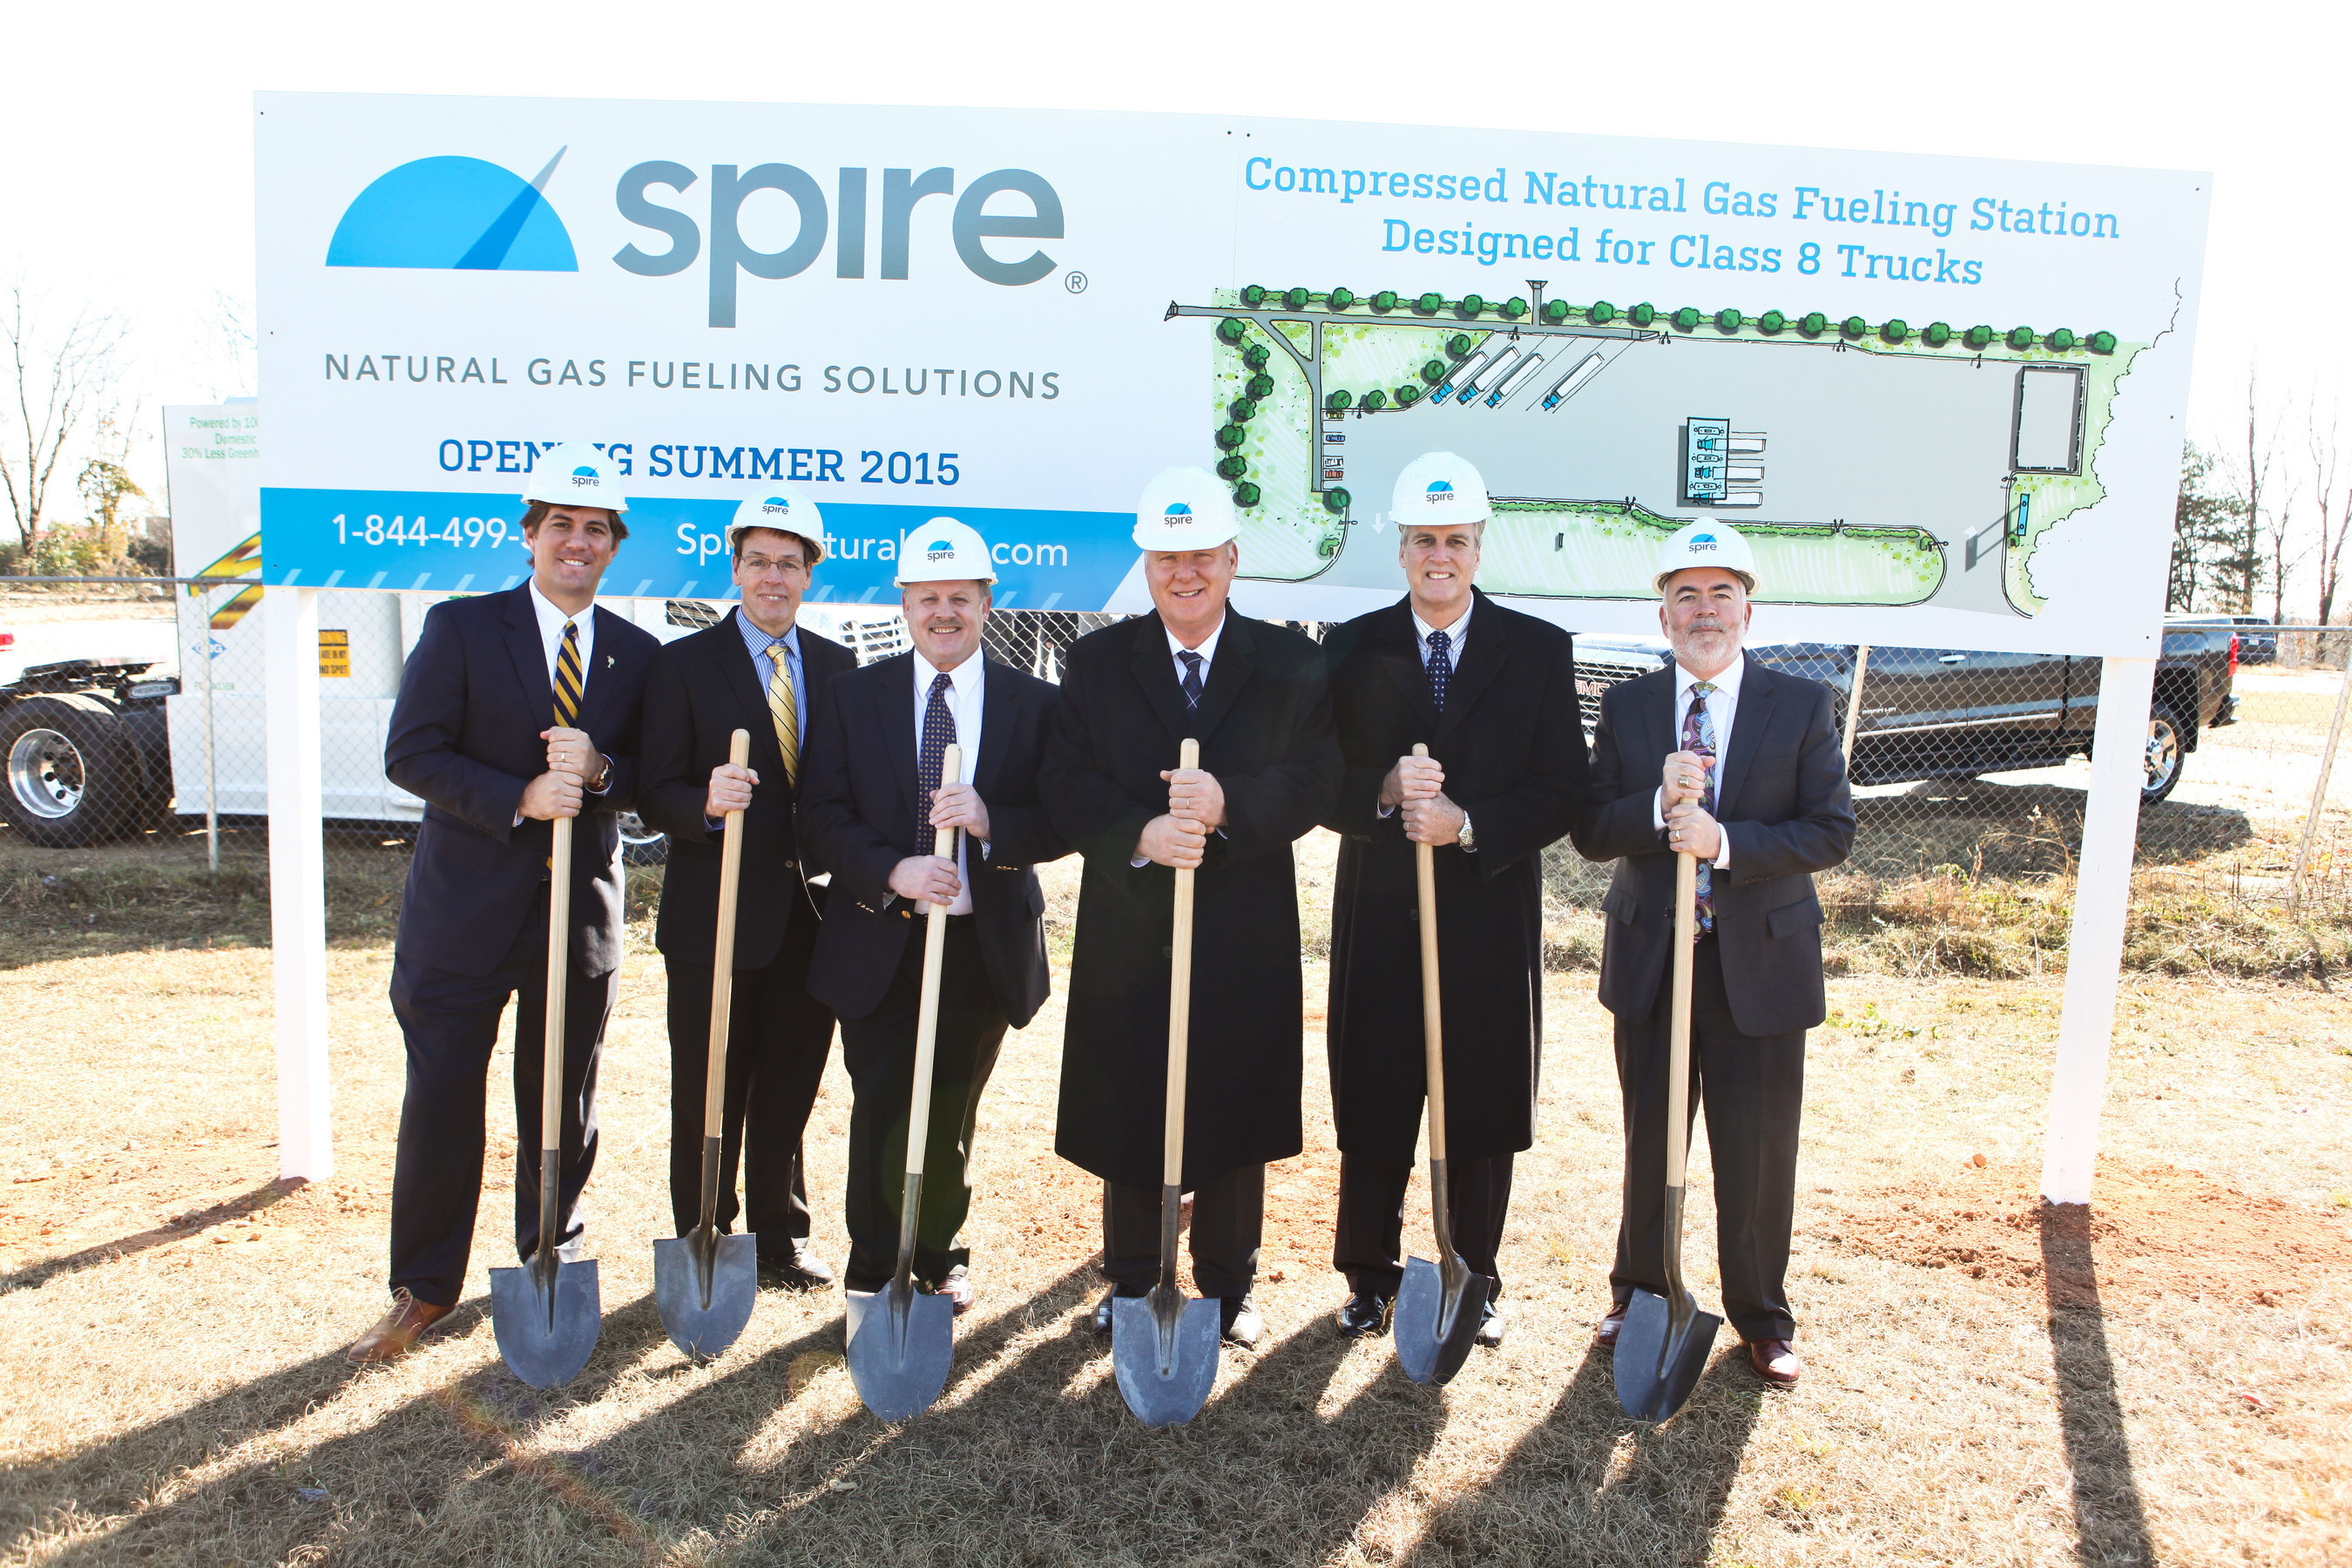 Local and company officials break ground for new Spire compressed natural gas station in Greer SC. (Left to Right) Mark Owens, Greer Chamber President; Scott Keeley, Siemens Project Director; Peter Stansky, COO of Spire; Perry Williams, Greer Commissioner of Public Works; Rick Danner, Mayor of Greer; Edward Driggers, Greer City Manager.